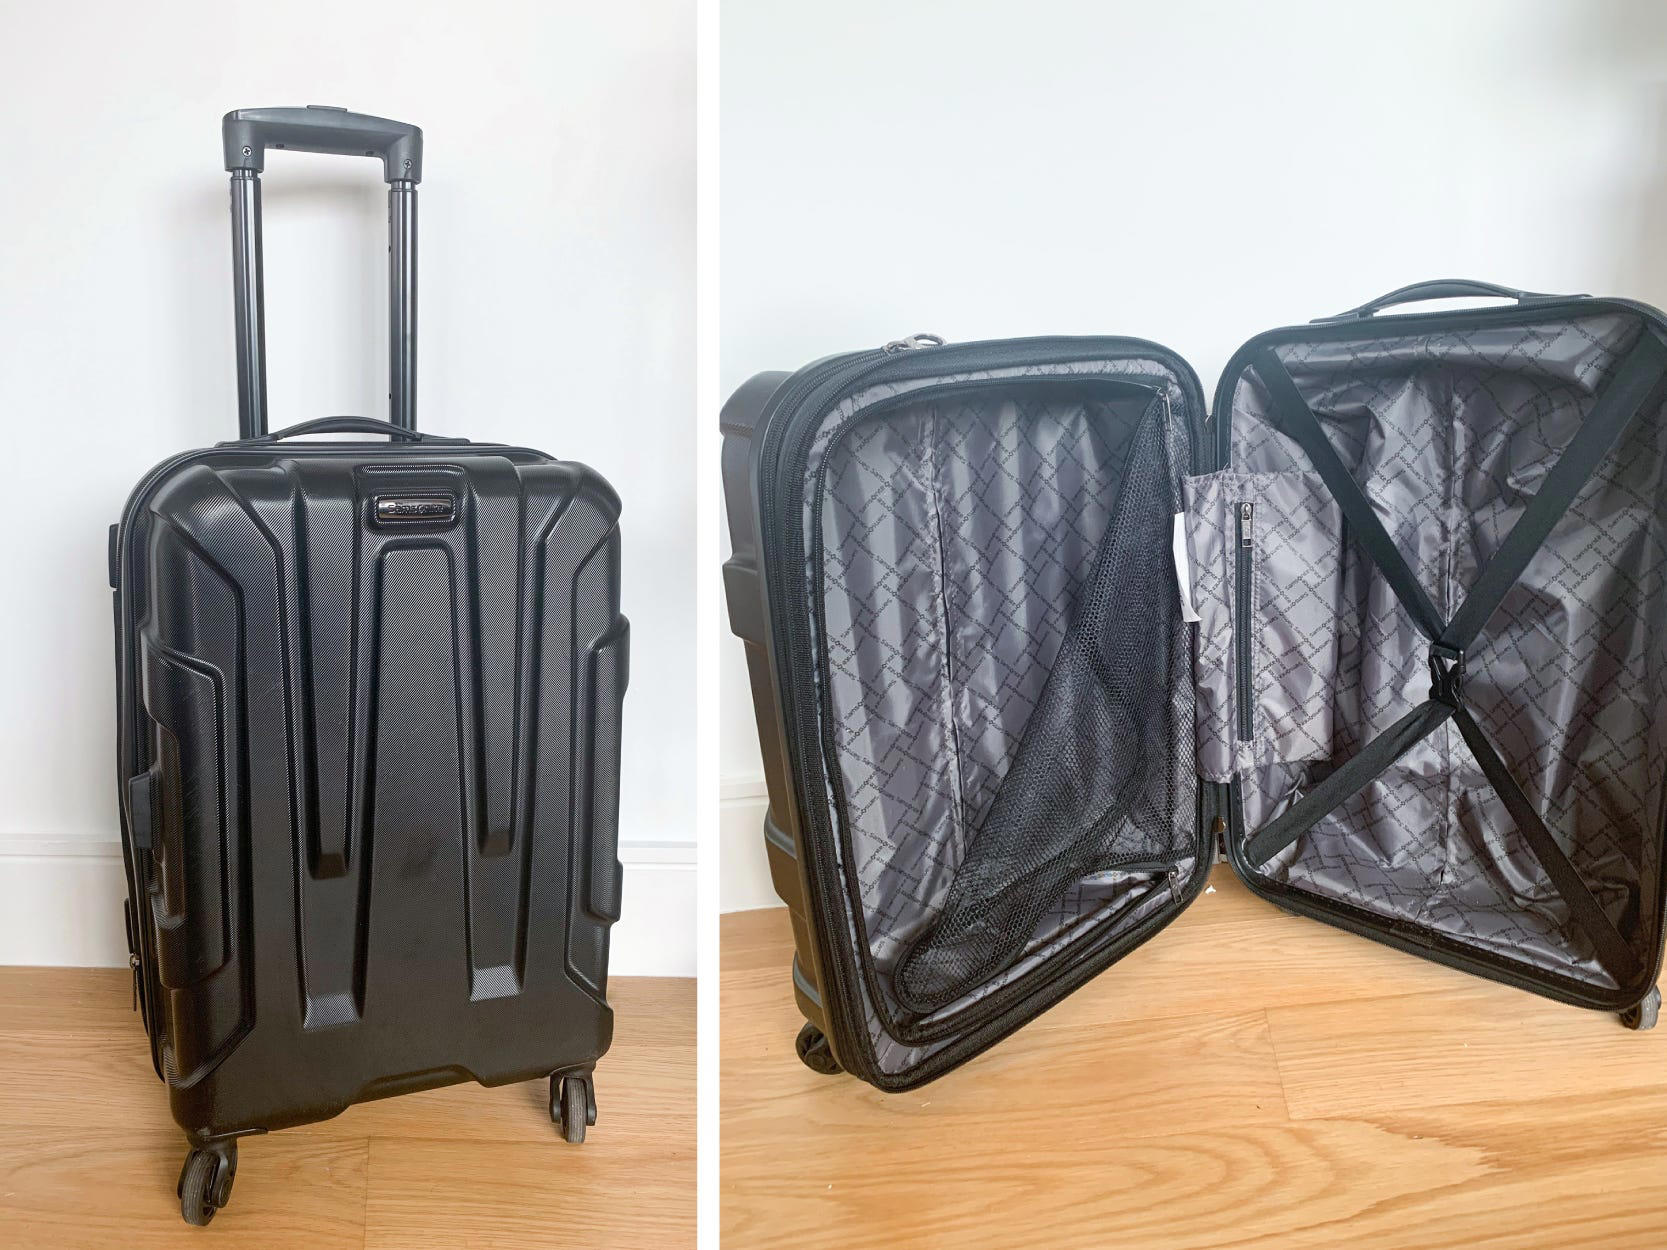 Samsonite Centric luggage review: This $130 bag is the best hard-sided ...